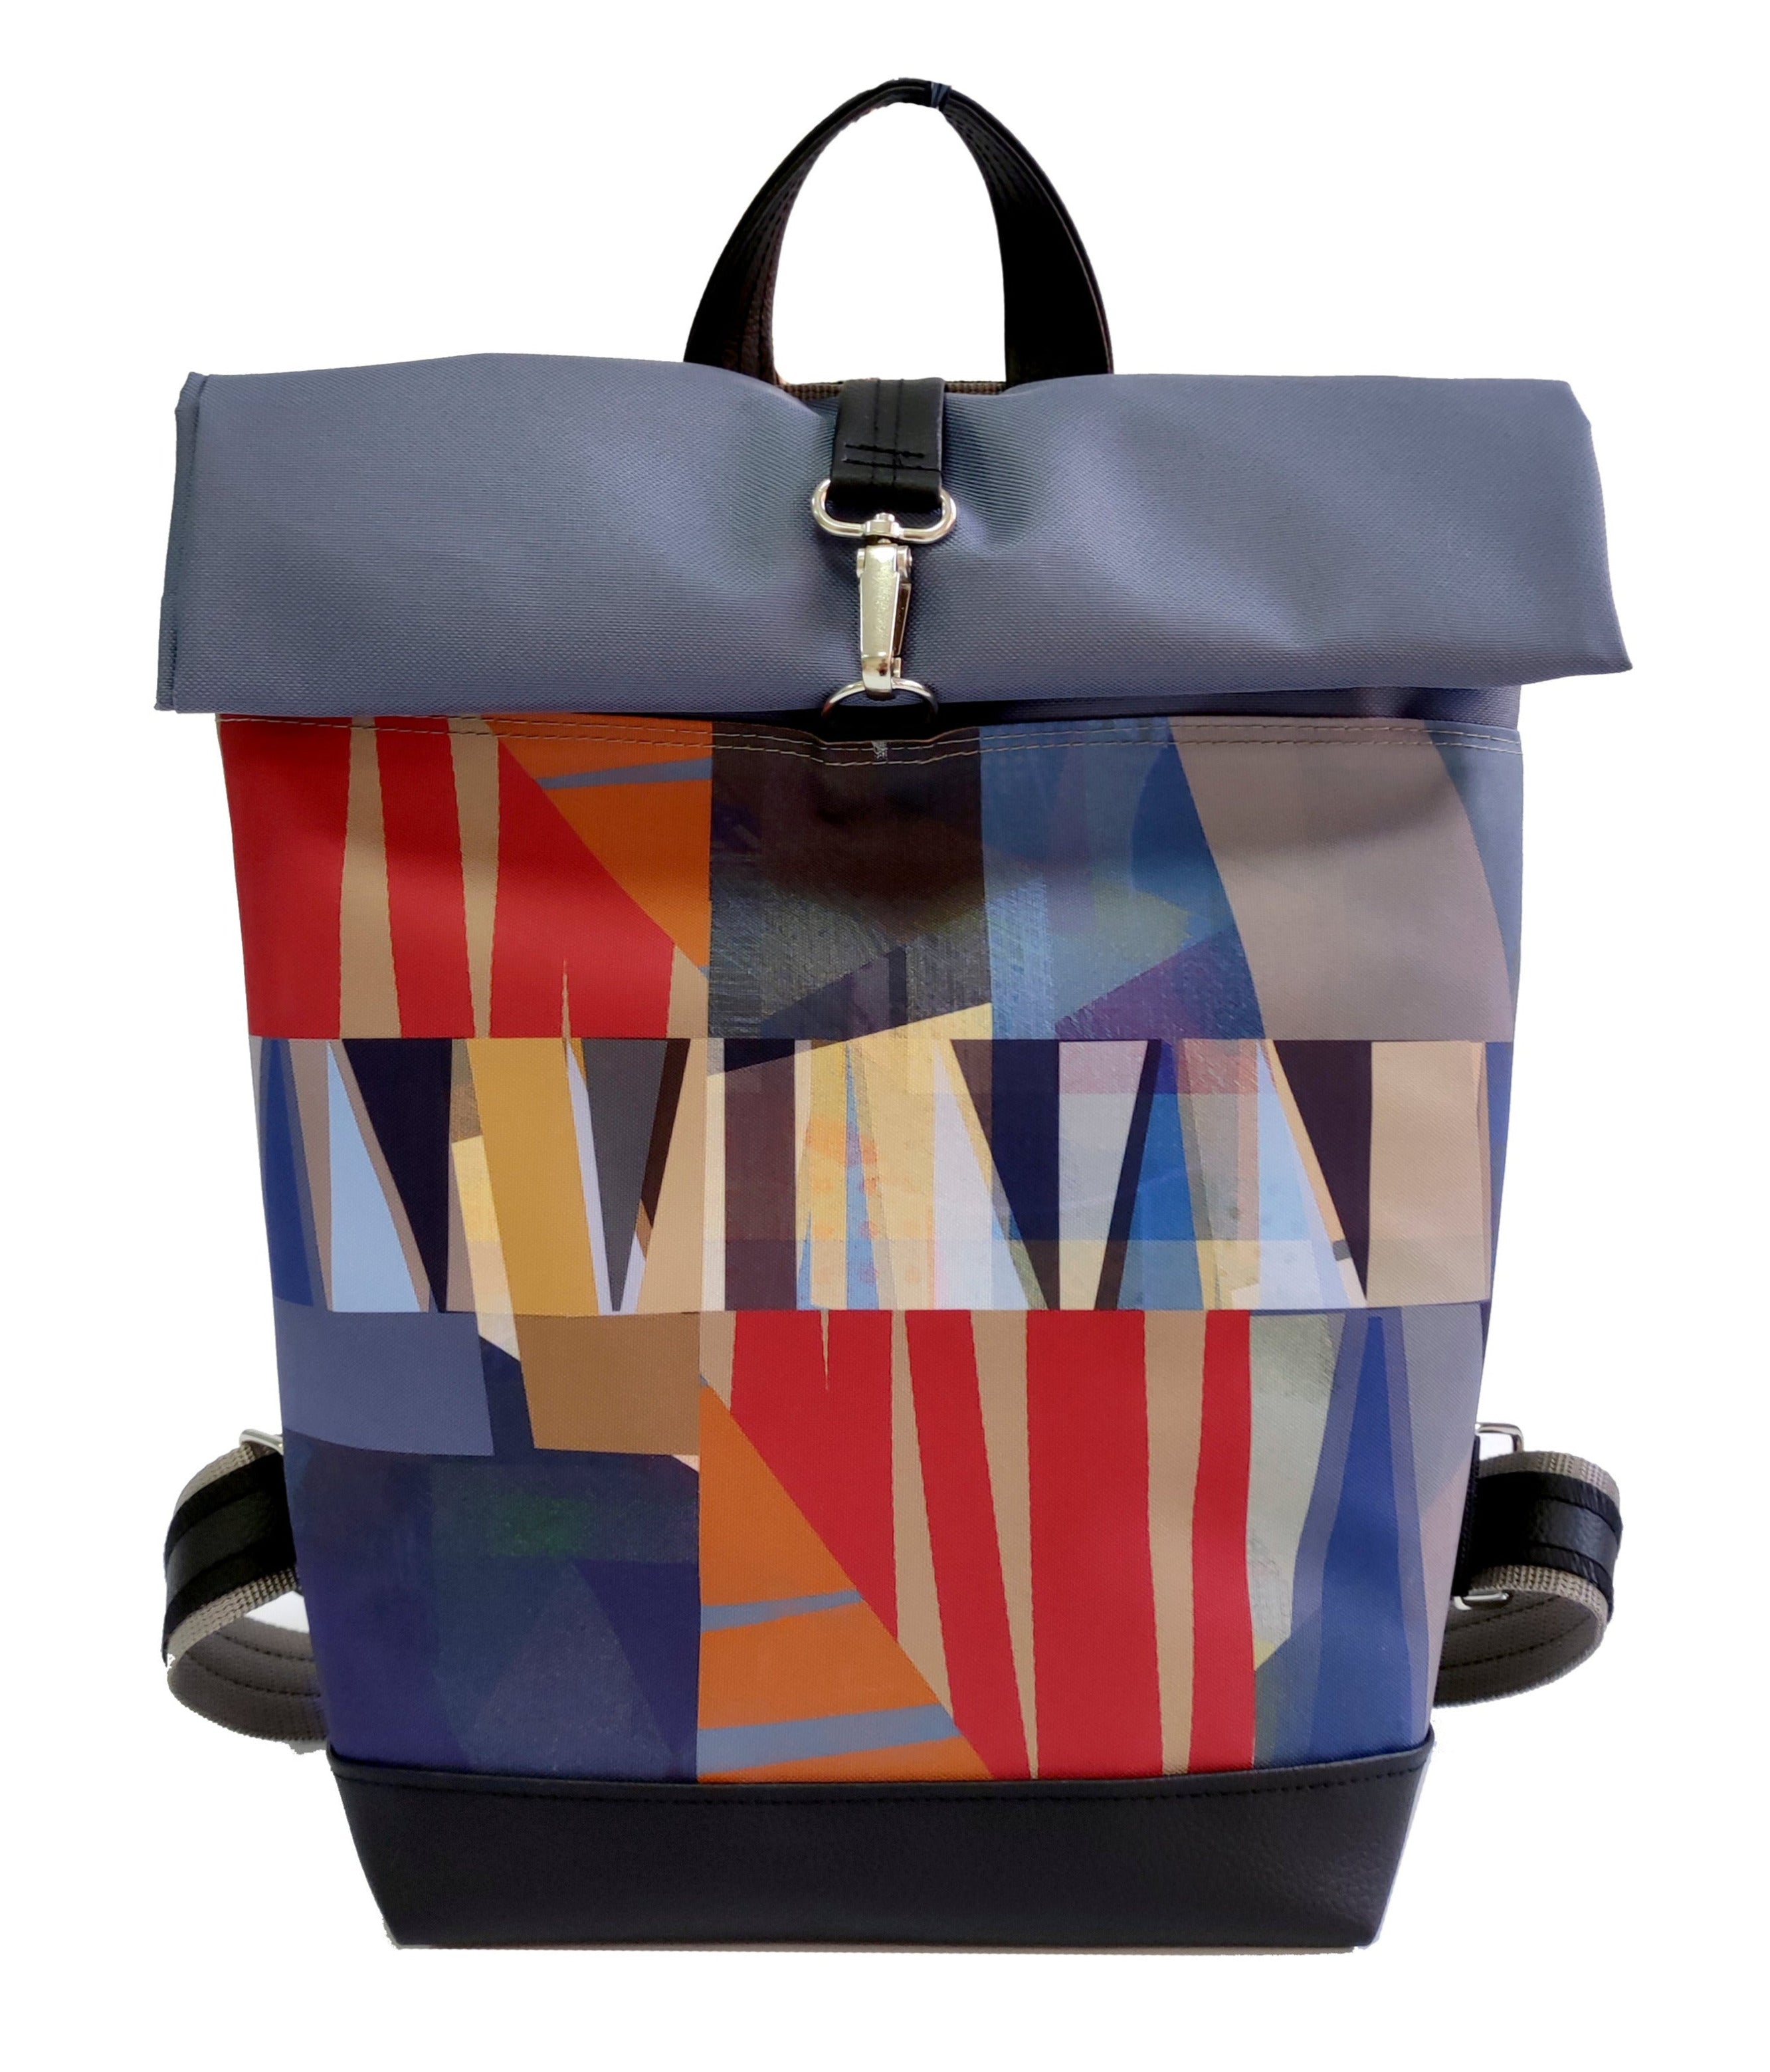 Bardo roll backpack - Gray shade - Premium Bardo backpack from BARDO ART WORKS - Just lvabstract, art, backpack, flowers, gift, green, handemade, orange, ping, purple, red, tablet, urban style, vegan leather, woman, yellow85! Shop now at BARDO ART WORKS